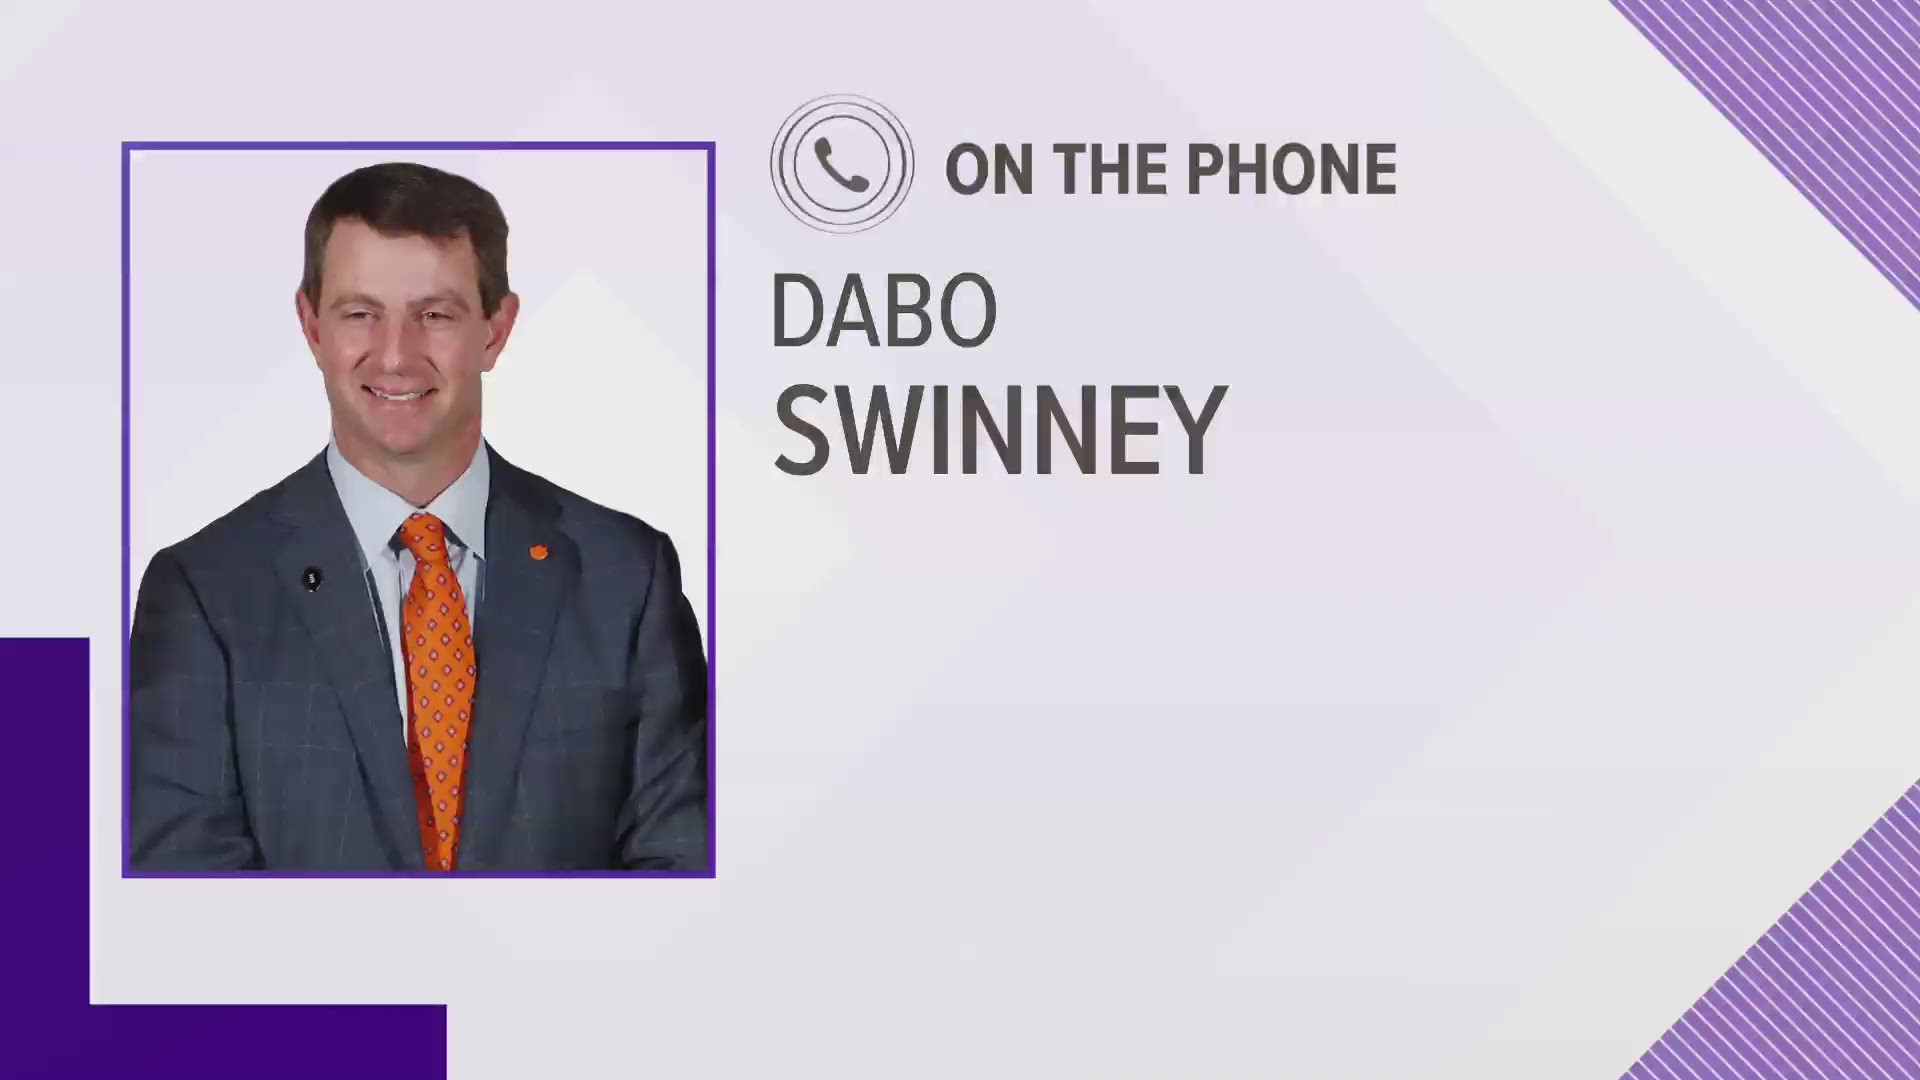 Clemson head coach Dabo Swinney spoke to reporters just minutes after news broke that his quarterback, Kelly Bryant, is leaving the program.